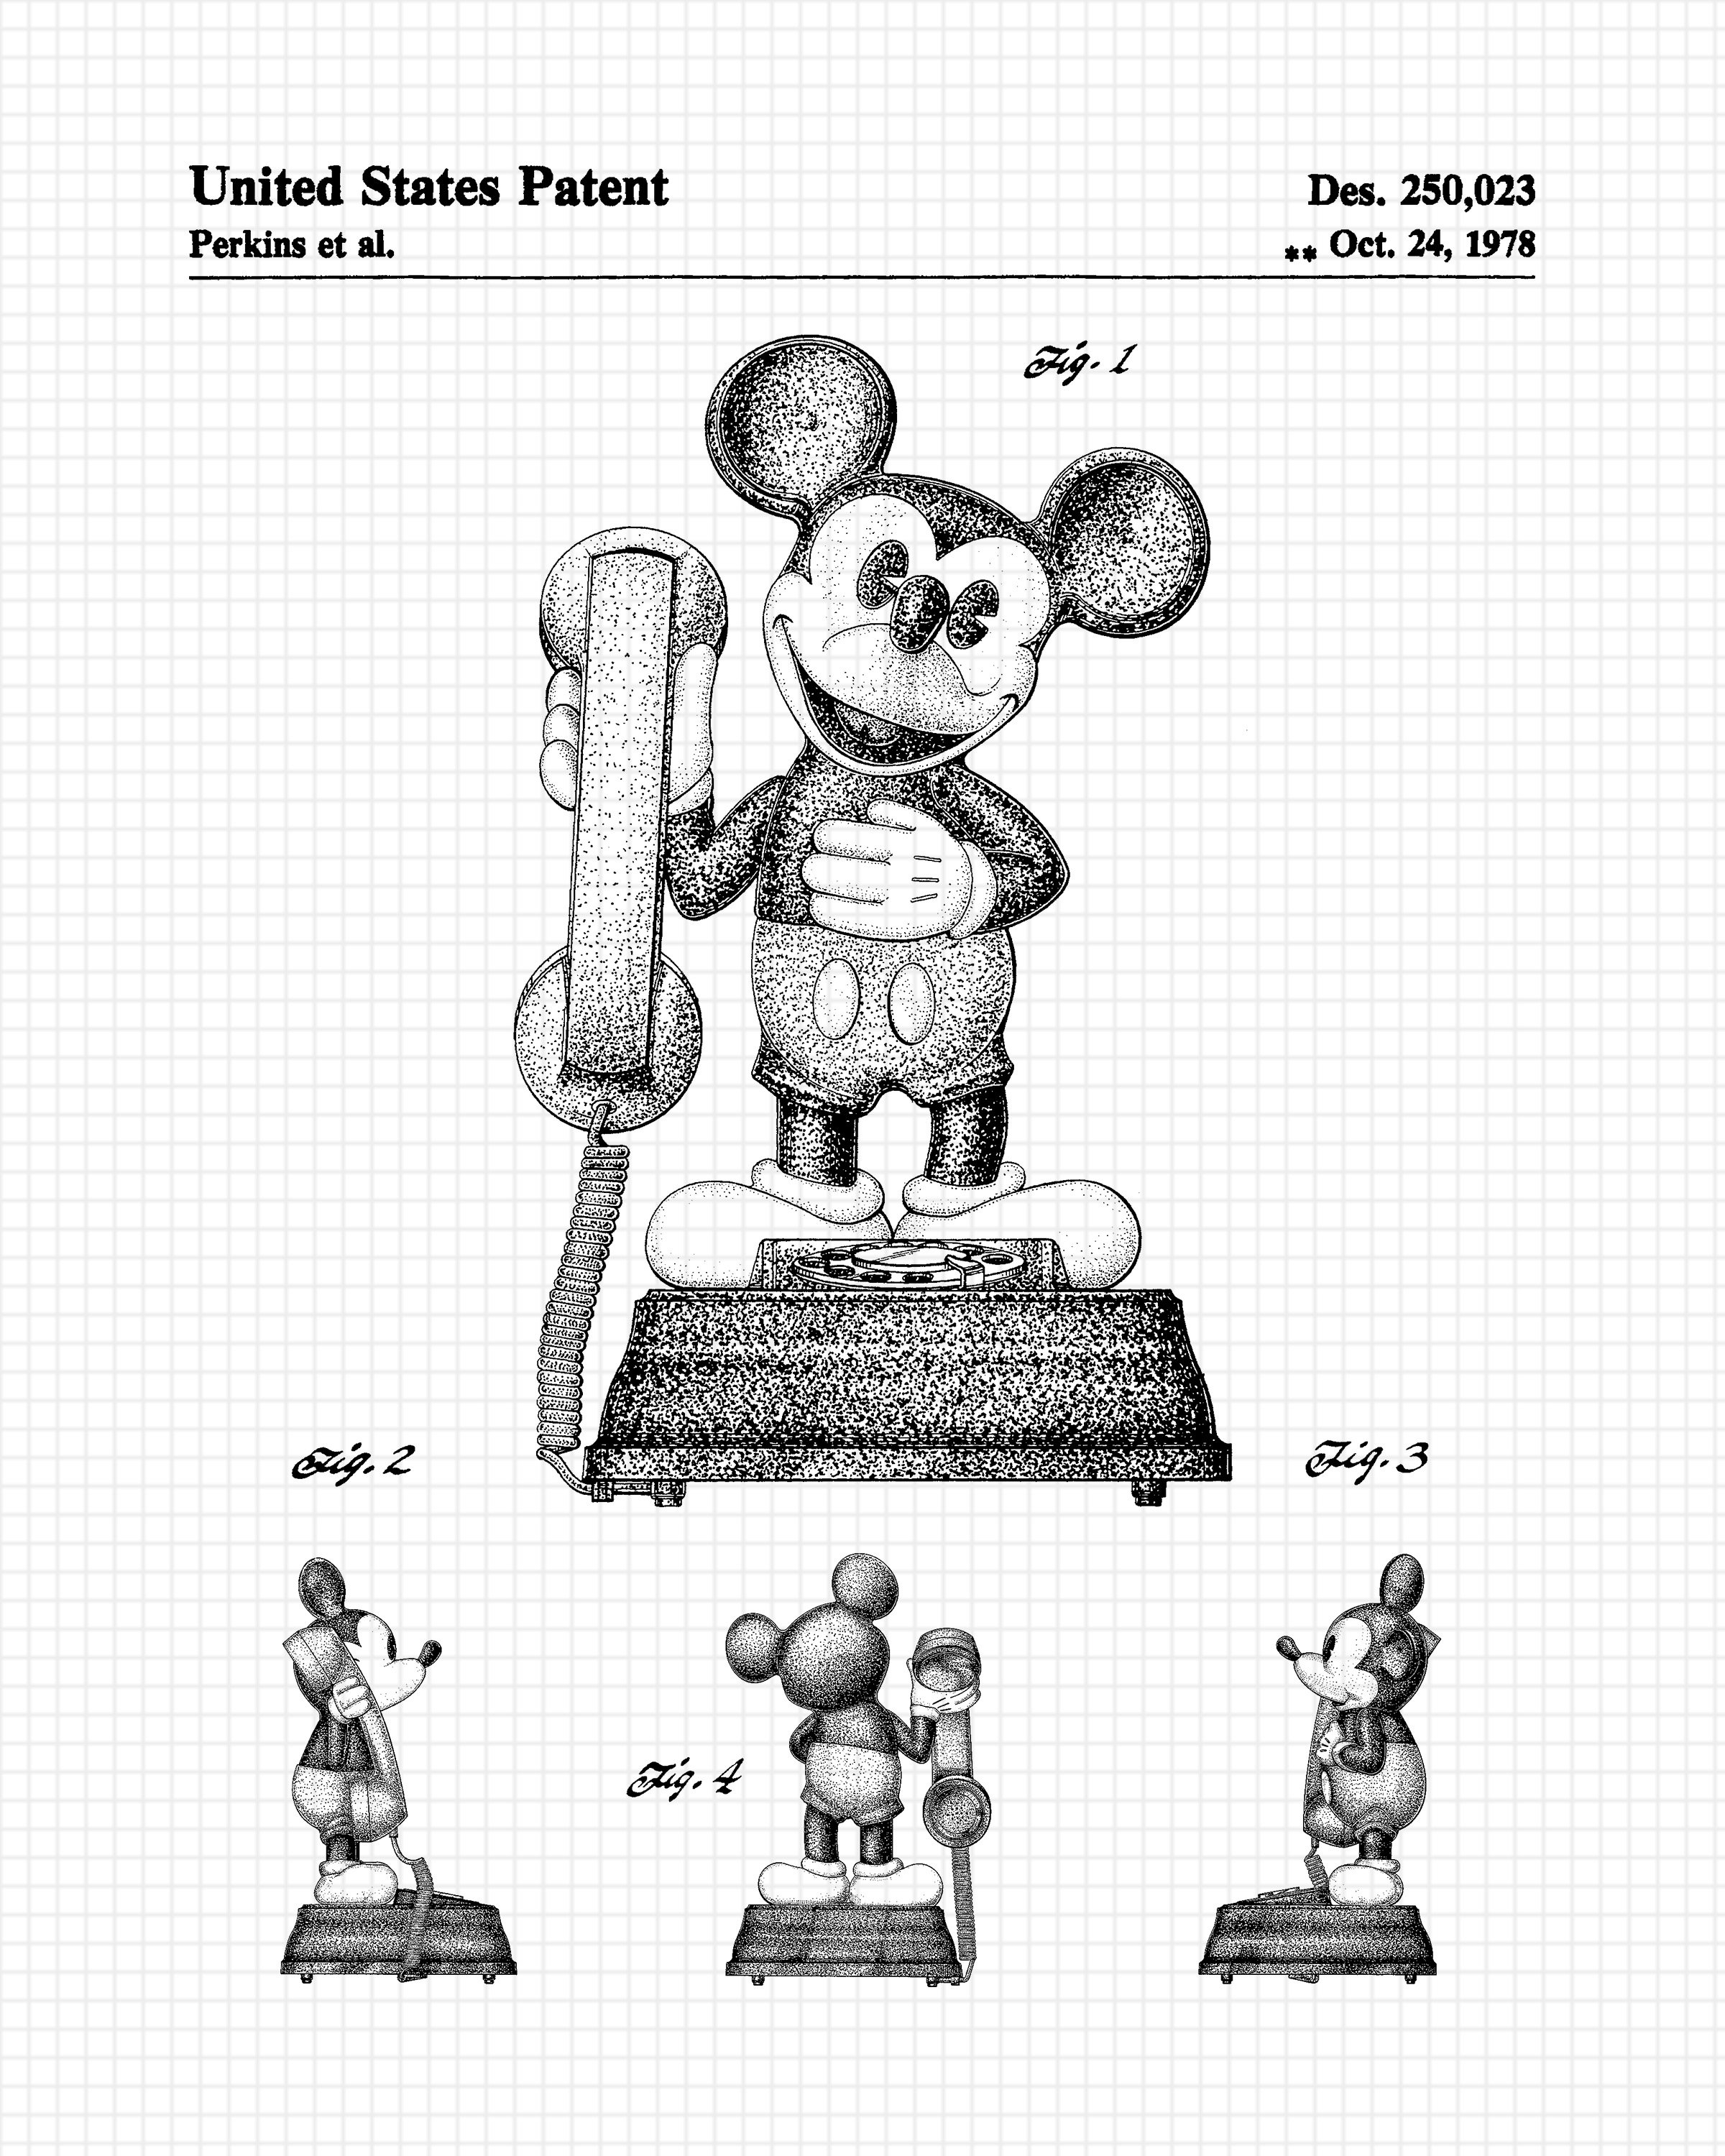 Vintage Mickey Fireworks Magic Patent Prints, 4 (8x10) Unframed Photos,  Wall Art Decor Gifts Under 20 for Home Office Man Cave School College  Student Teacher Ca…